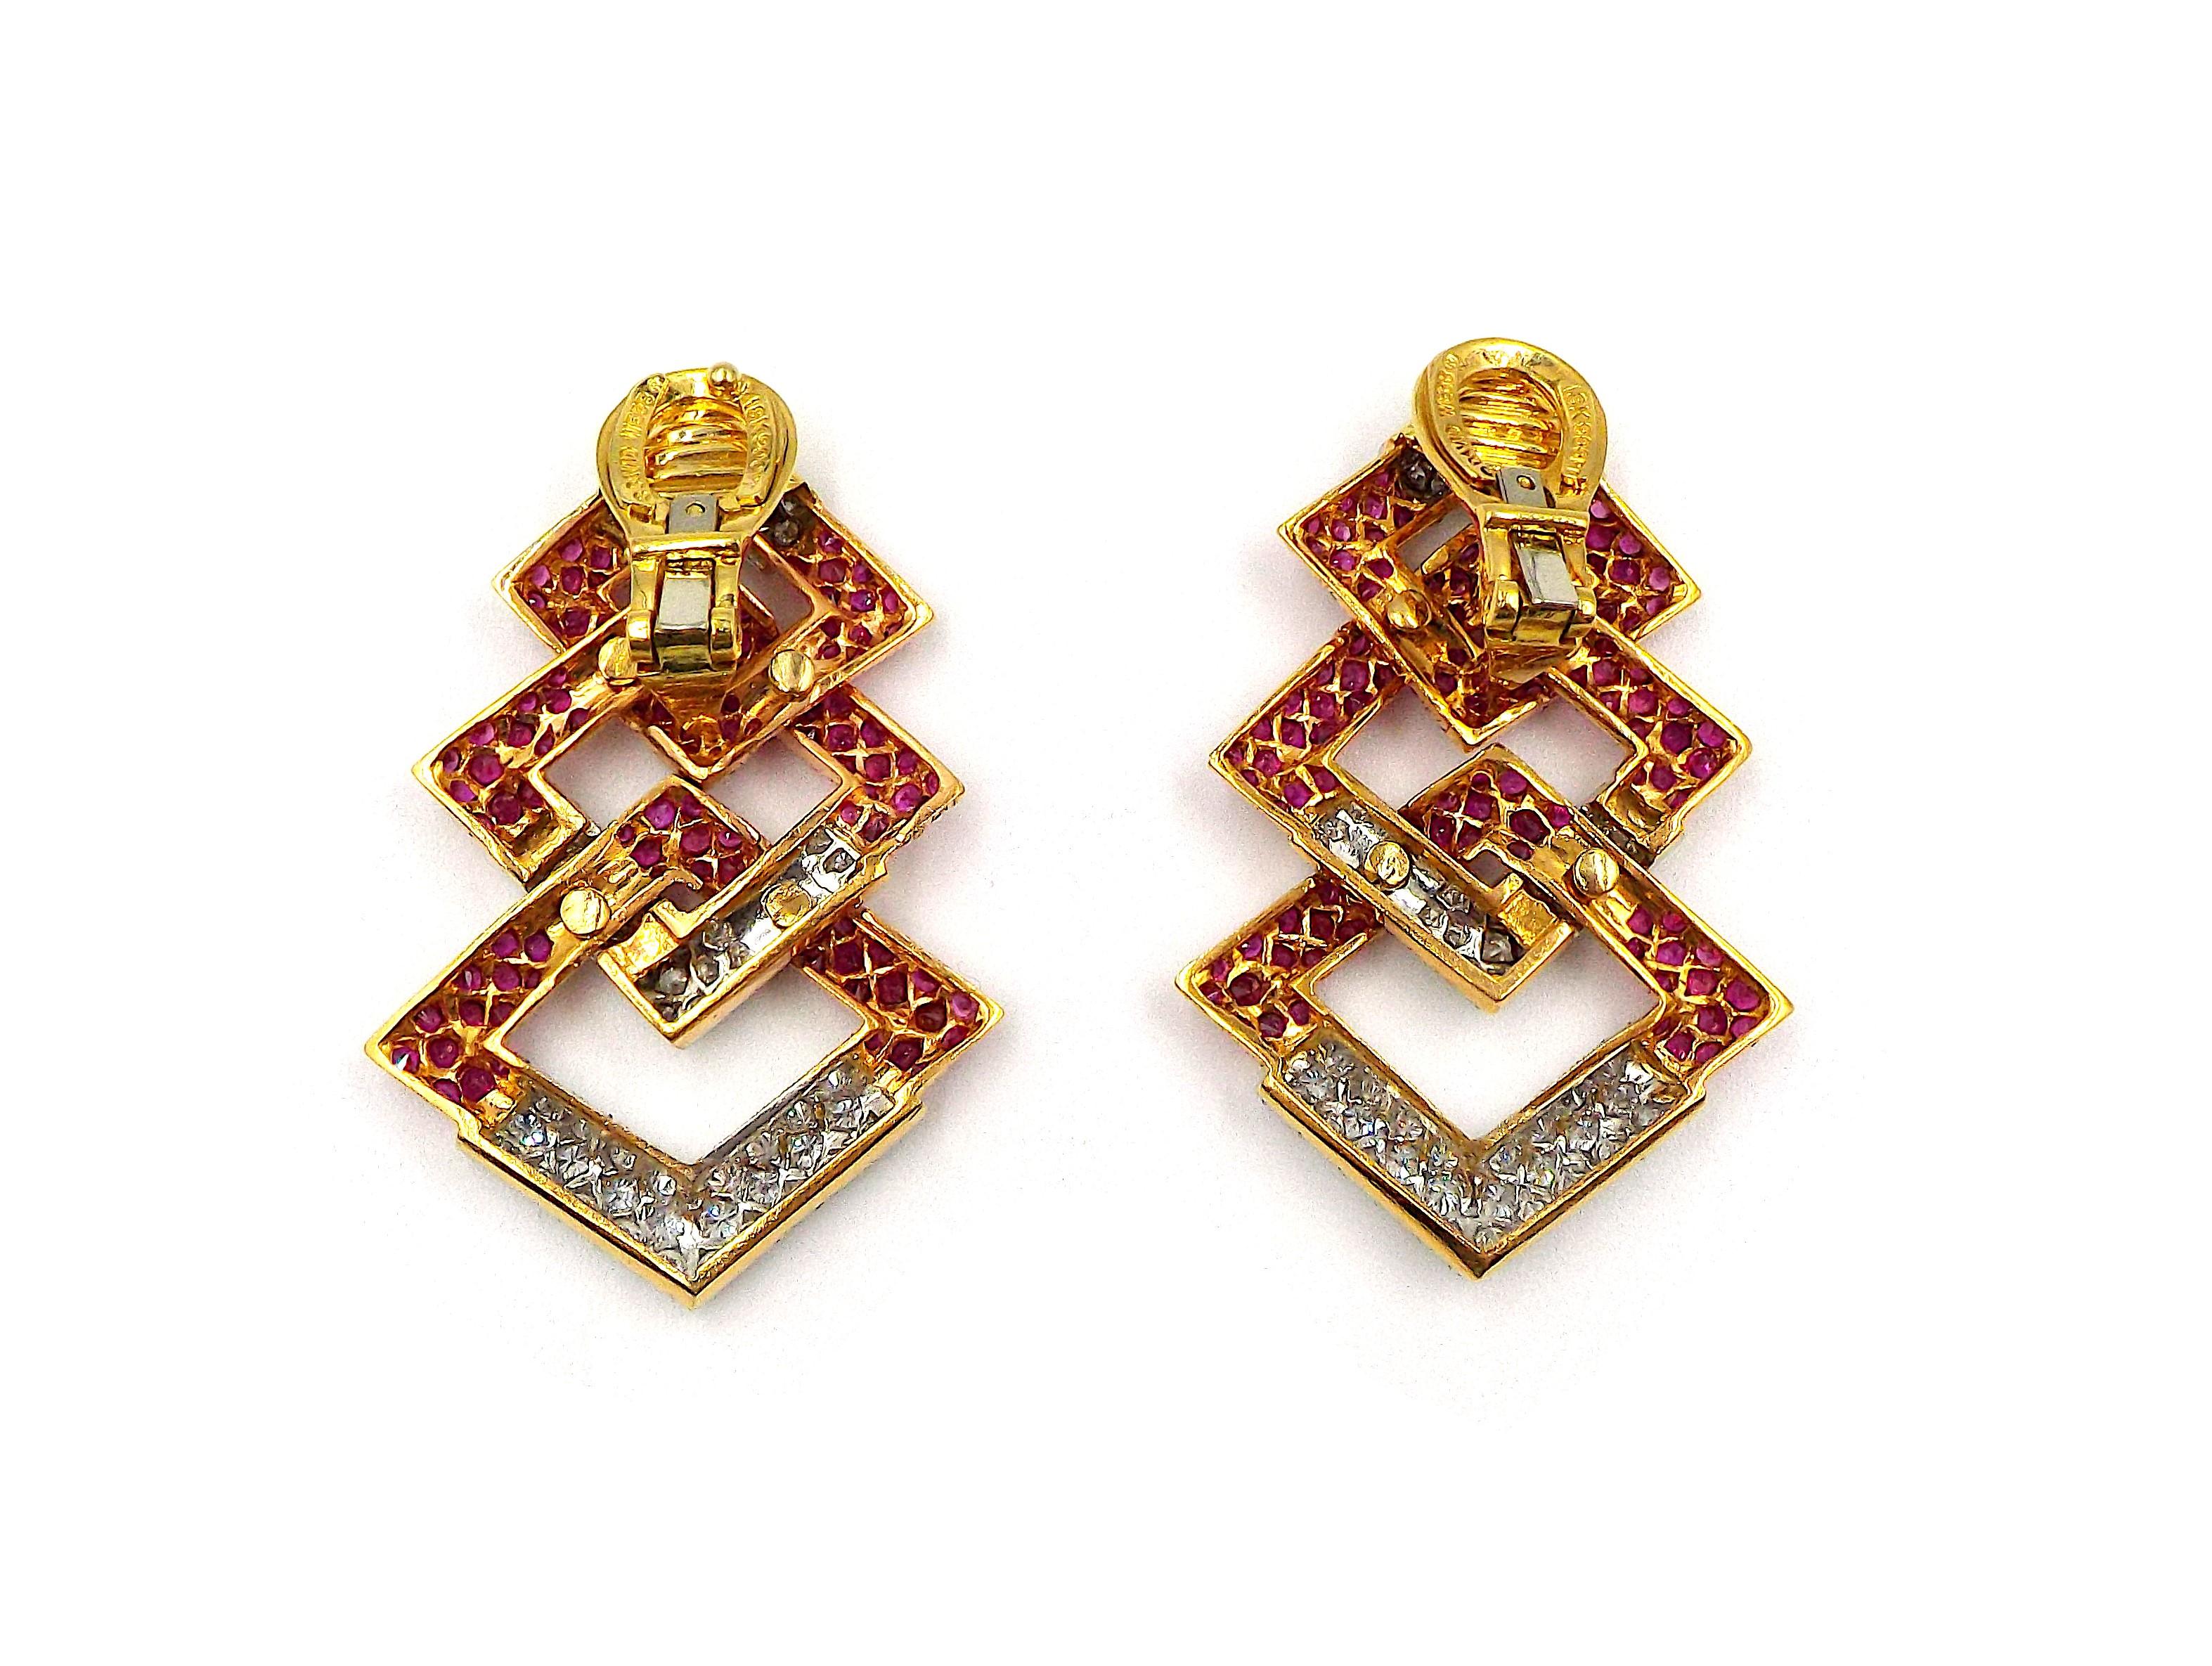 Pair of large 18k rose gold and platinum earrings by David Webb, set with approx. 7.50ctw in rubies and approx. 5.15ctw in diamonds. The earrings are 51mm x 35mm. Marked David Webb, 18k, 900PT. Weight is 42.8 grams.